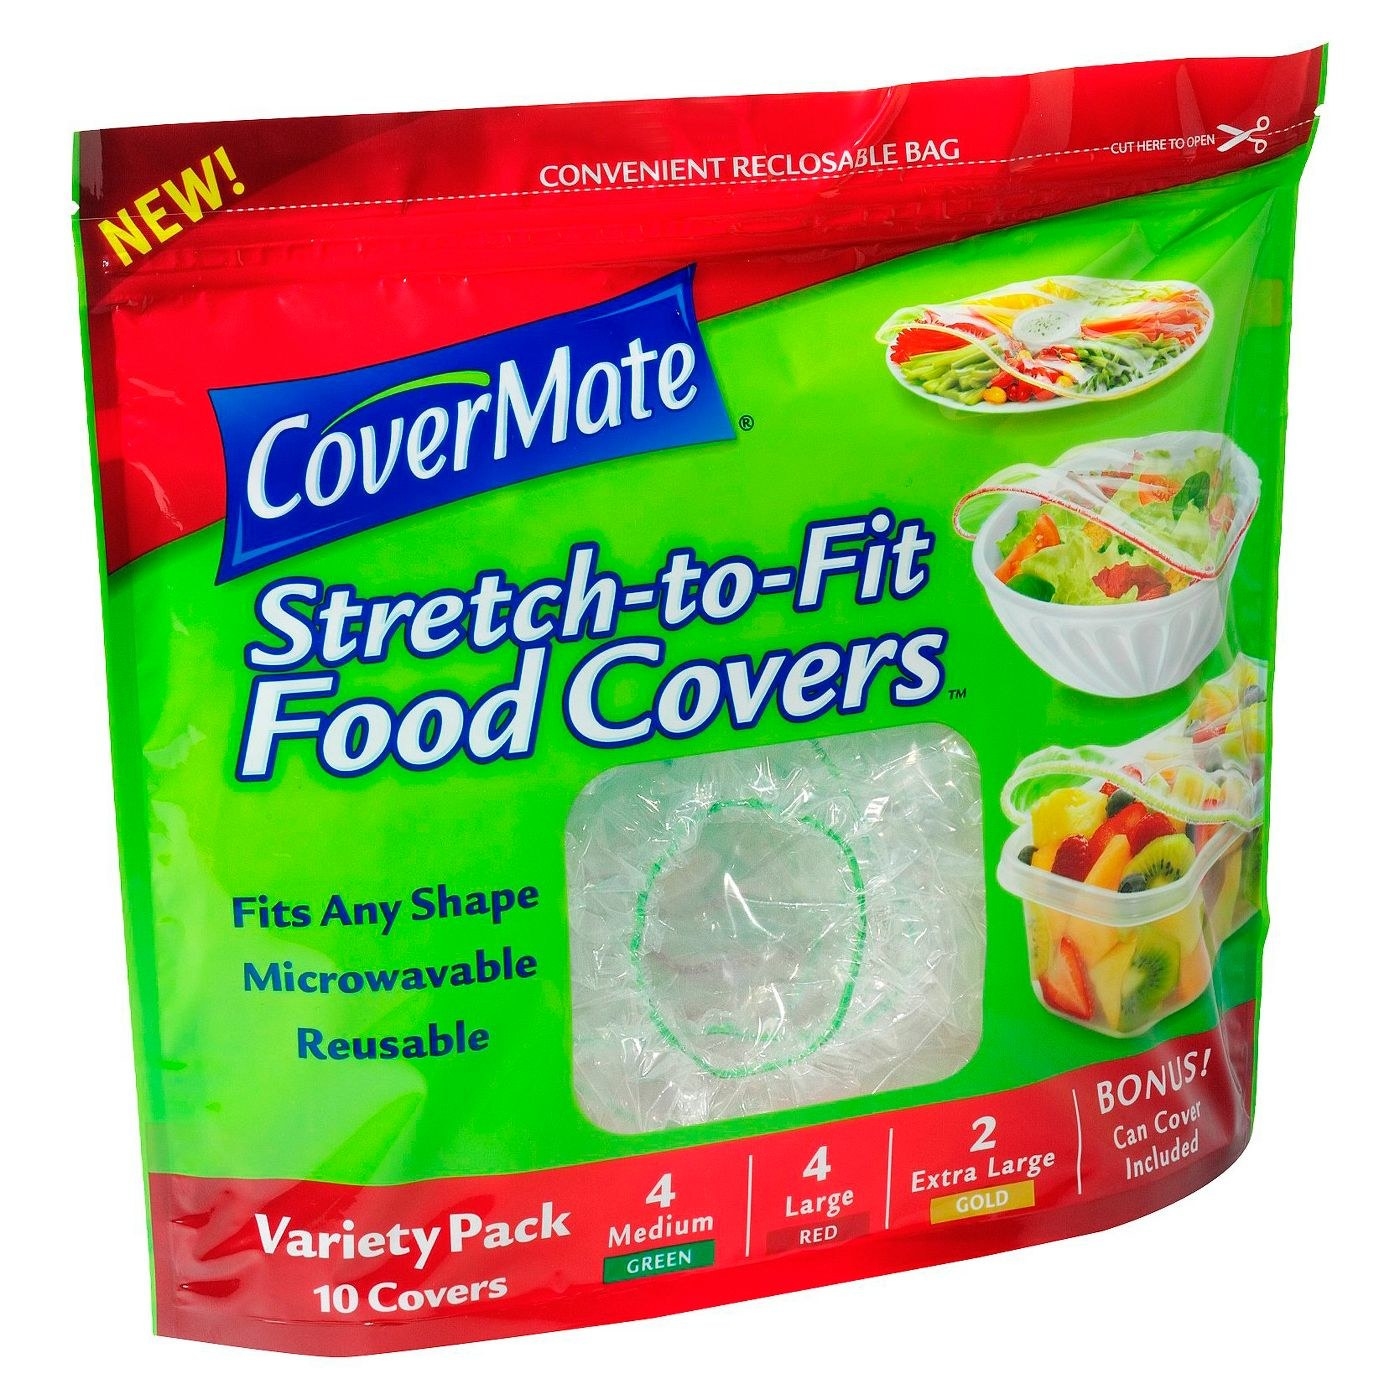 The bag of food covers